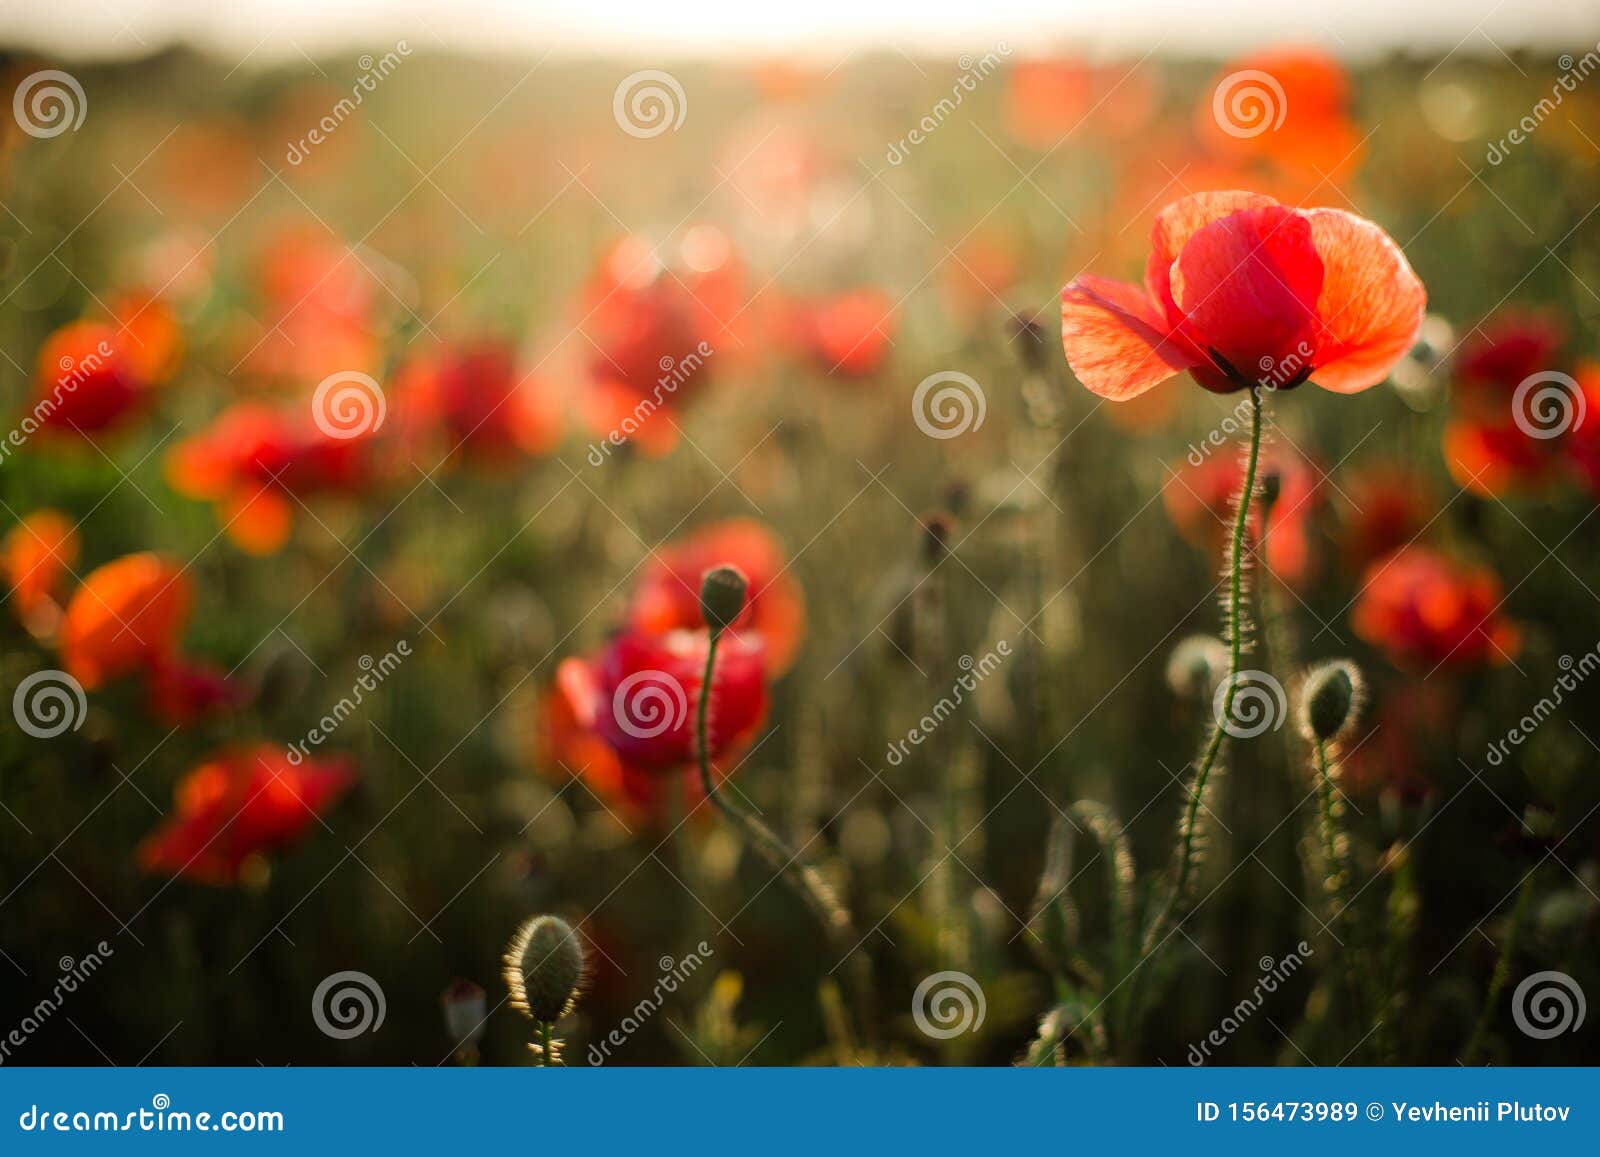 Poppy Field Close-up, Blooming Wild Flowers in the Setting Sun. Red ...